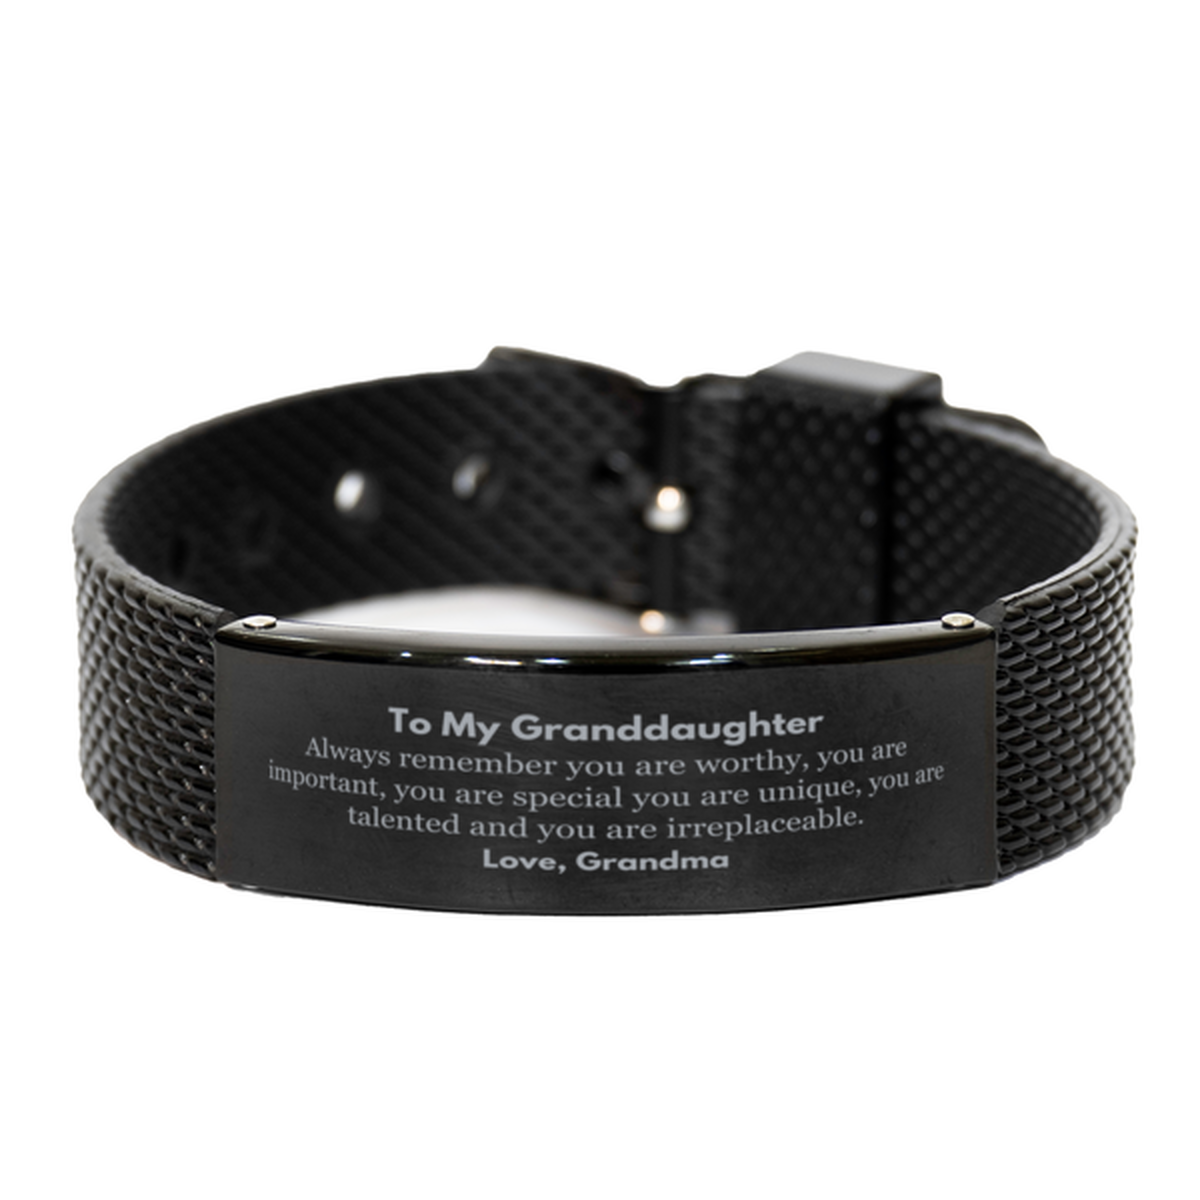 Granddaughter Birthday Gifts from Grandma, Inspirational Black Shark Mesh Bracelet for Granddaughter Christmas Graduation Gifts for Granddaughter Always remember you are worthy, you are important. Love, Grandma